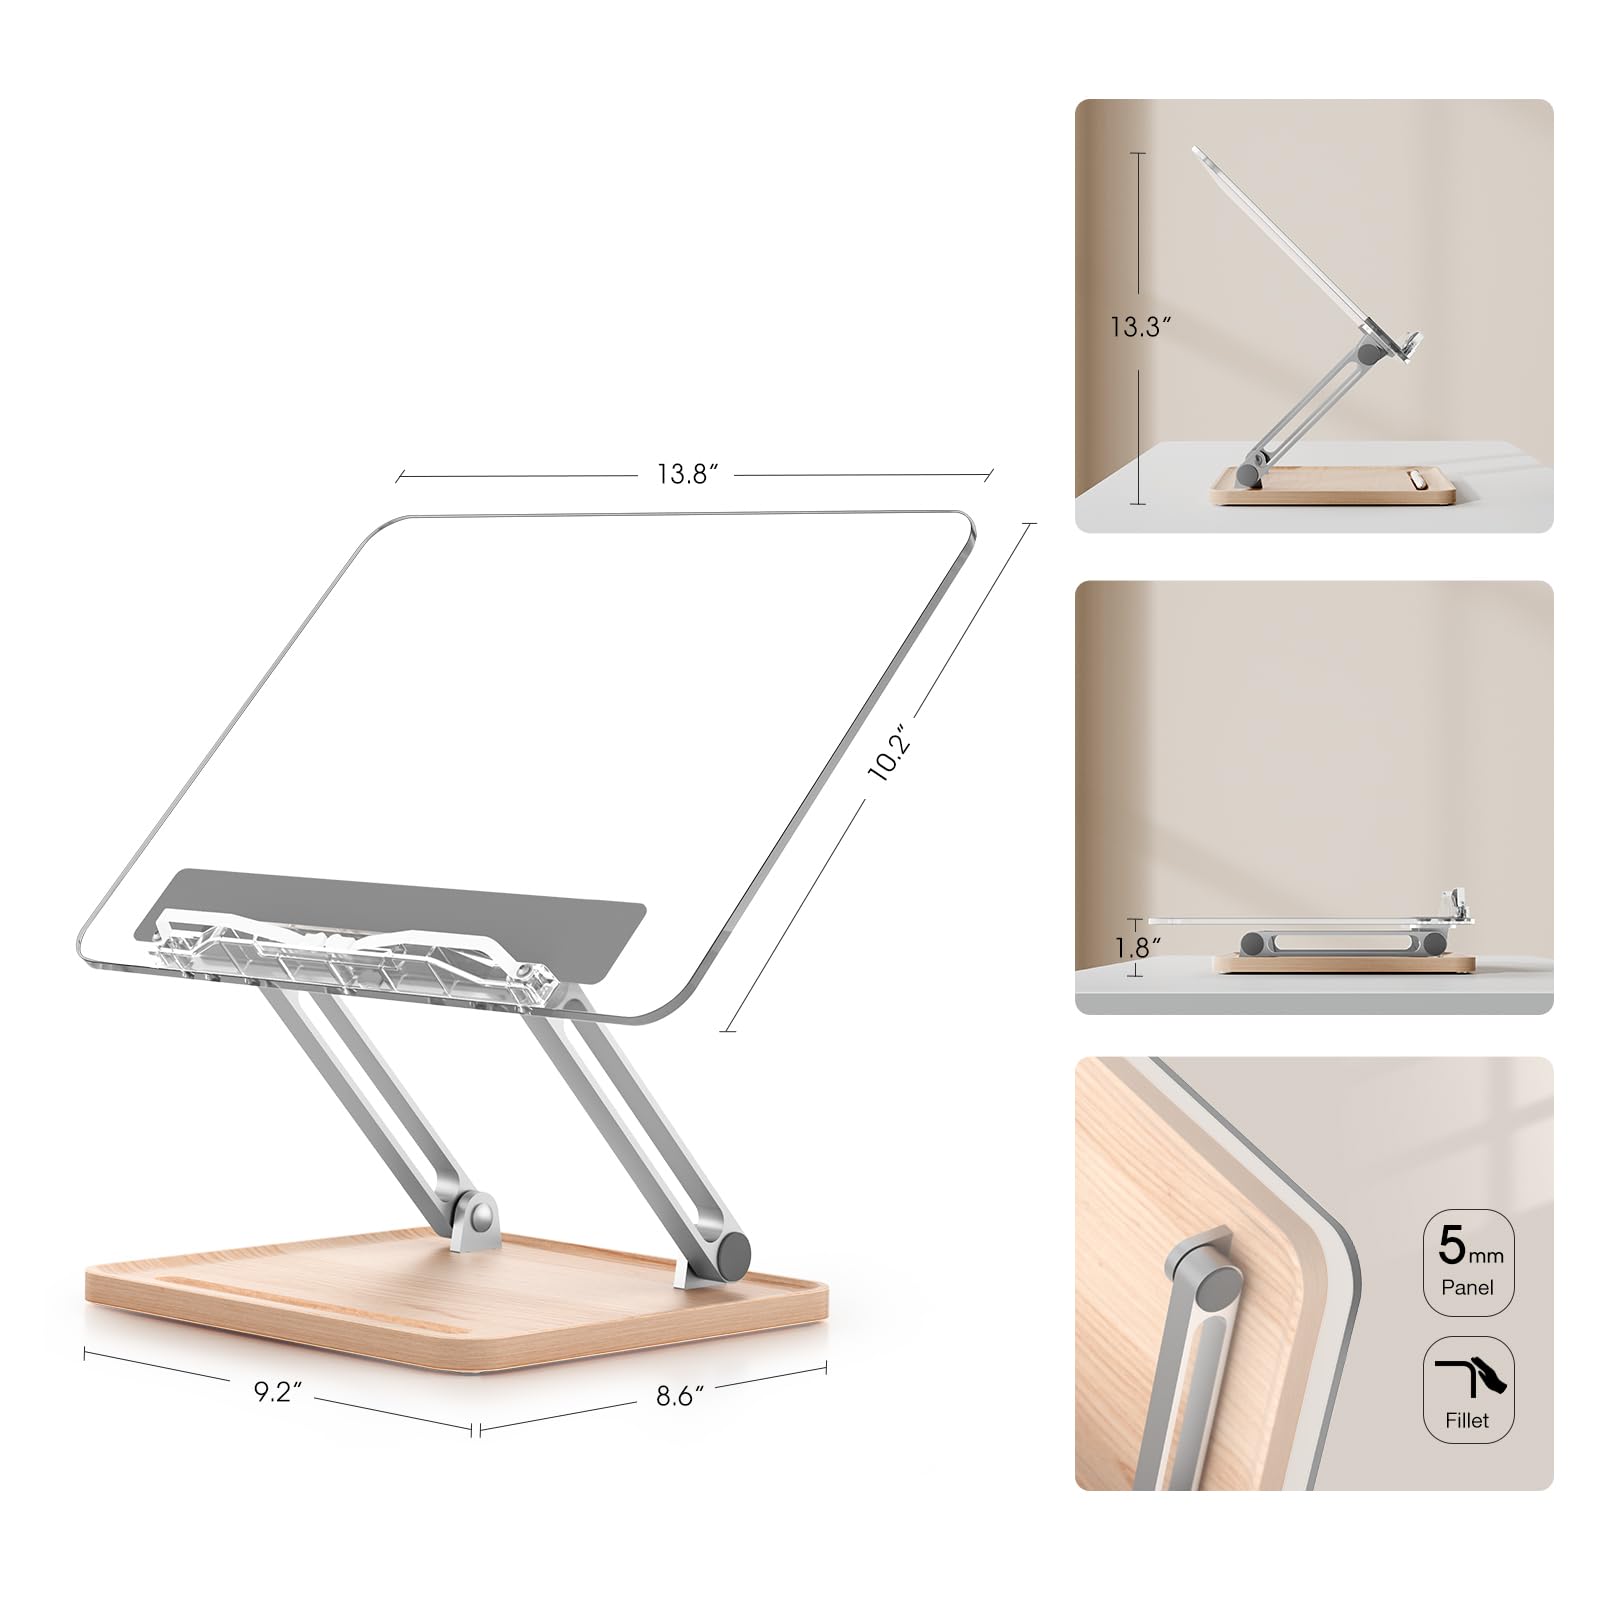 Adjustable Acrylic Book Stand for Reading, UPERGO Book Holder with Pen Slot, Foldable Desktop Riser for Laptop, Recipe, Textbook - Hands-Free,Cookbook Stand, Clear Design with Page Clips